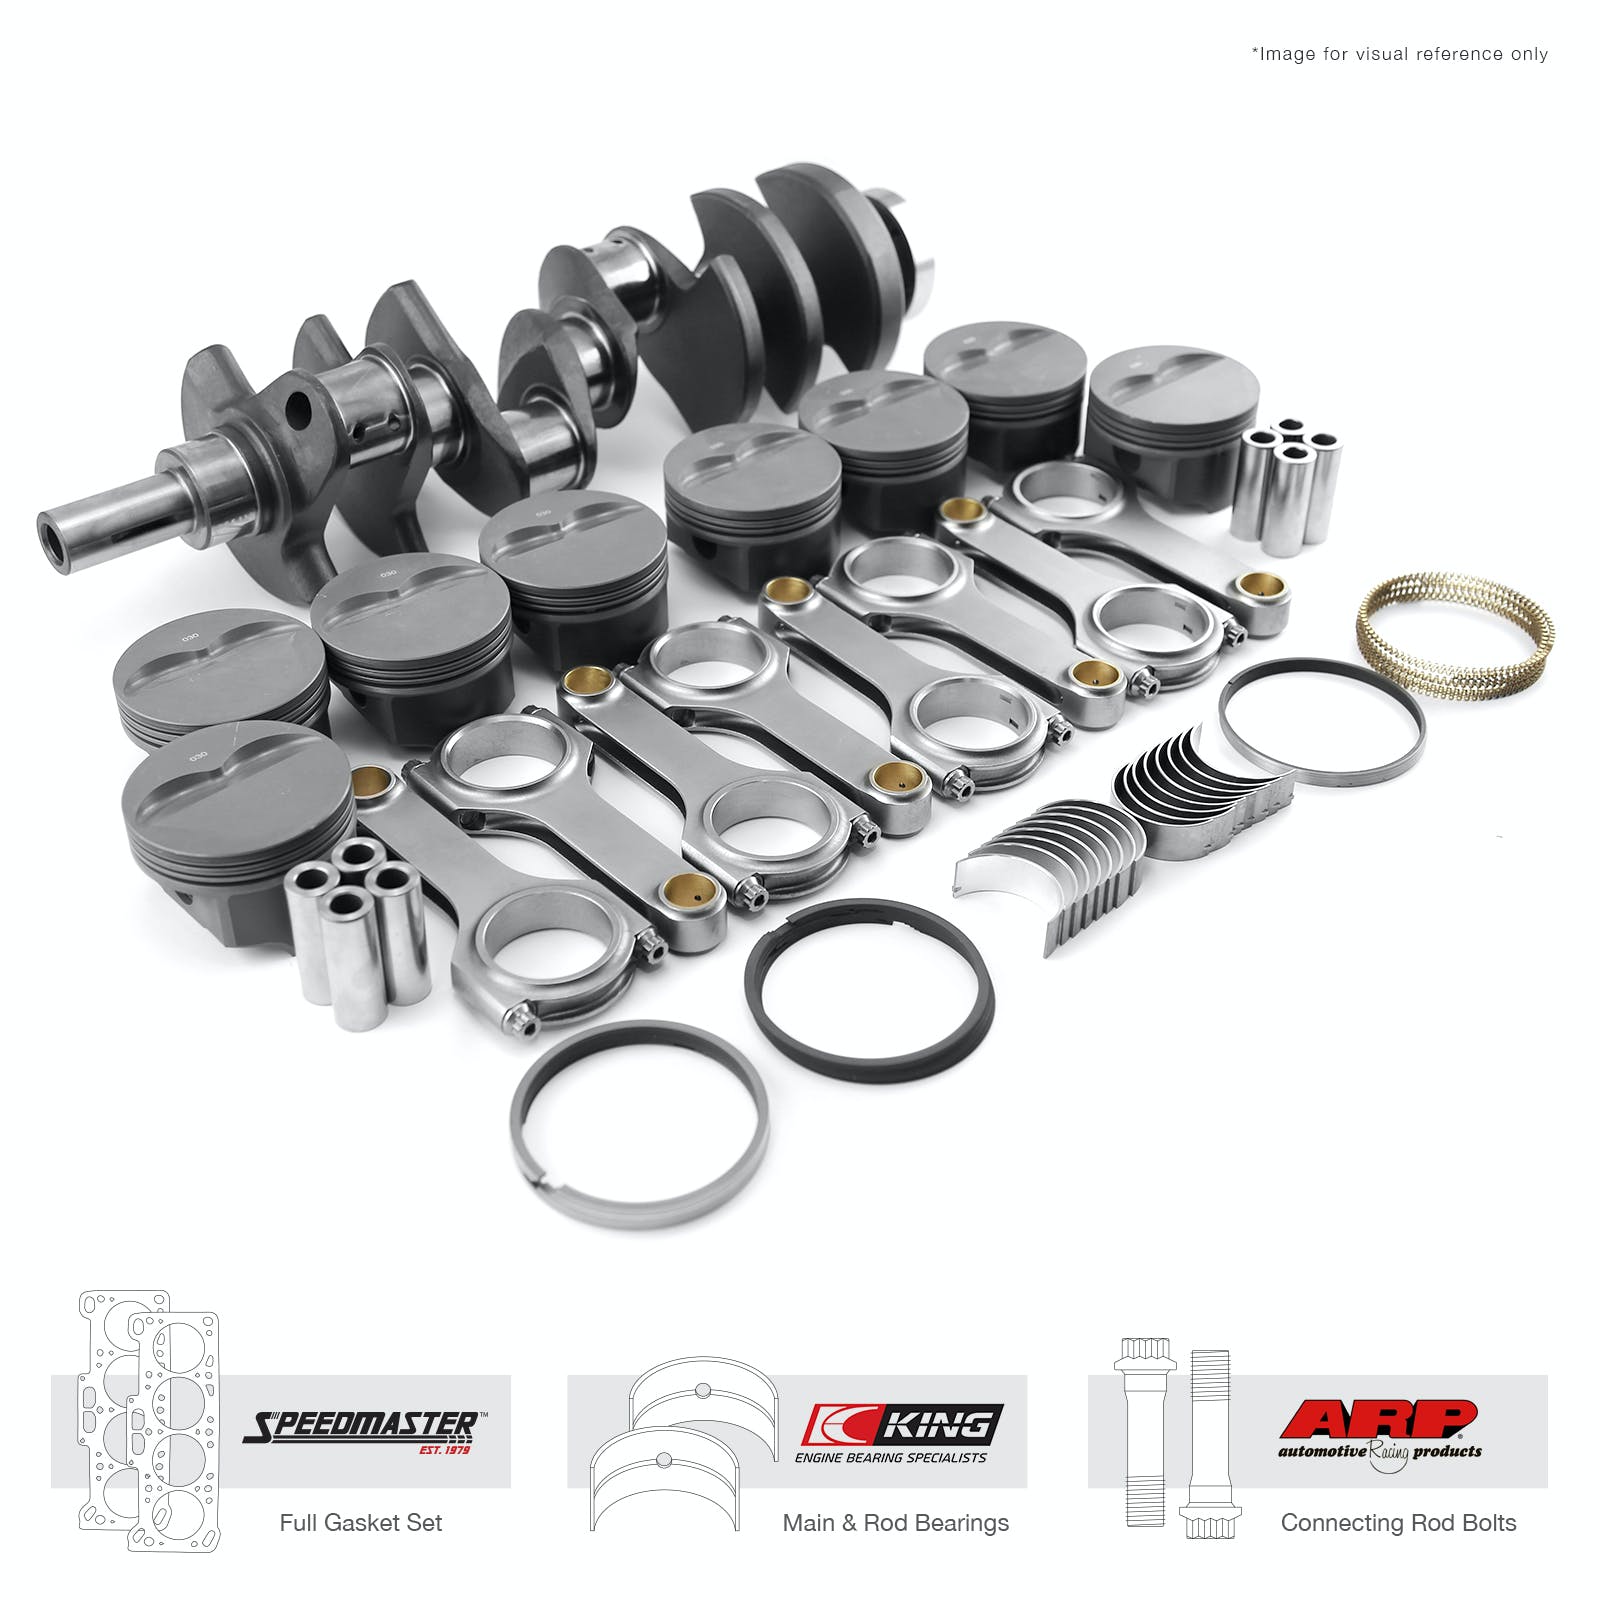 Speedmaster 1-290-010 3.850 393 ci Rotating Assembly Kit - Outlaw Series